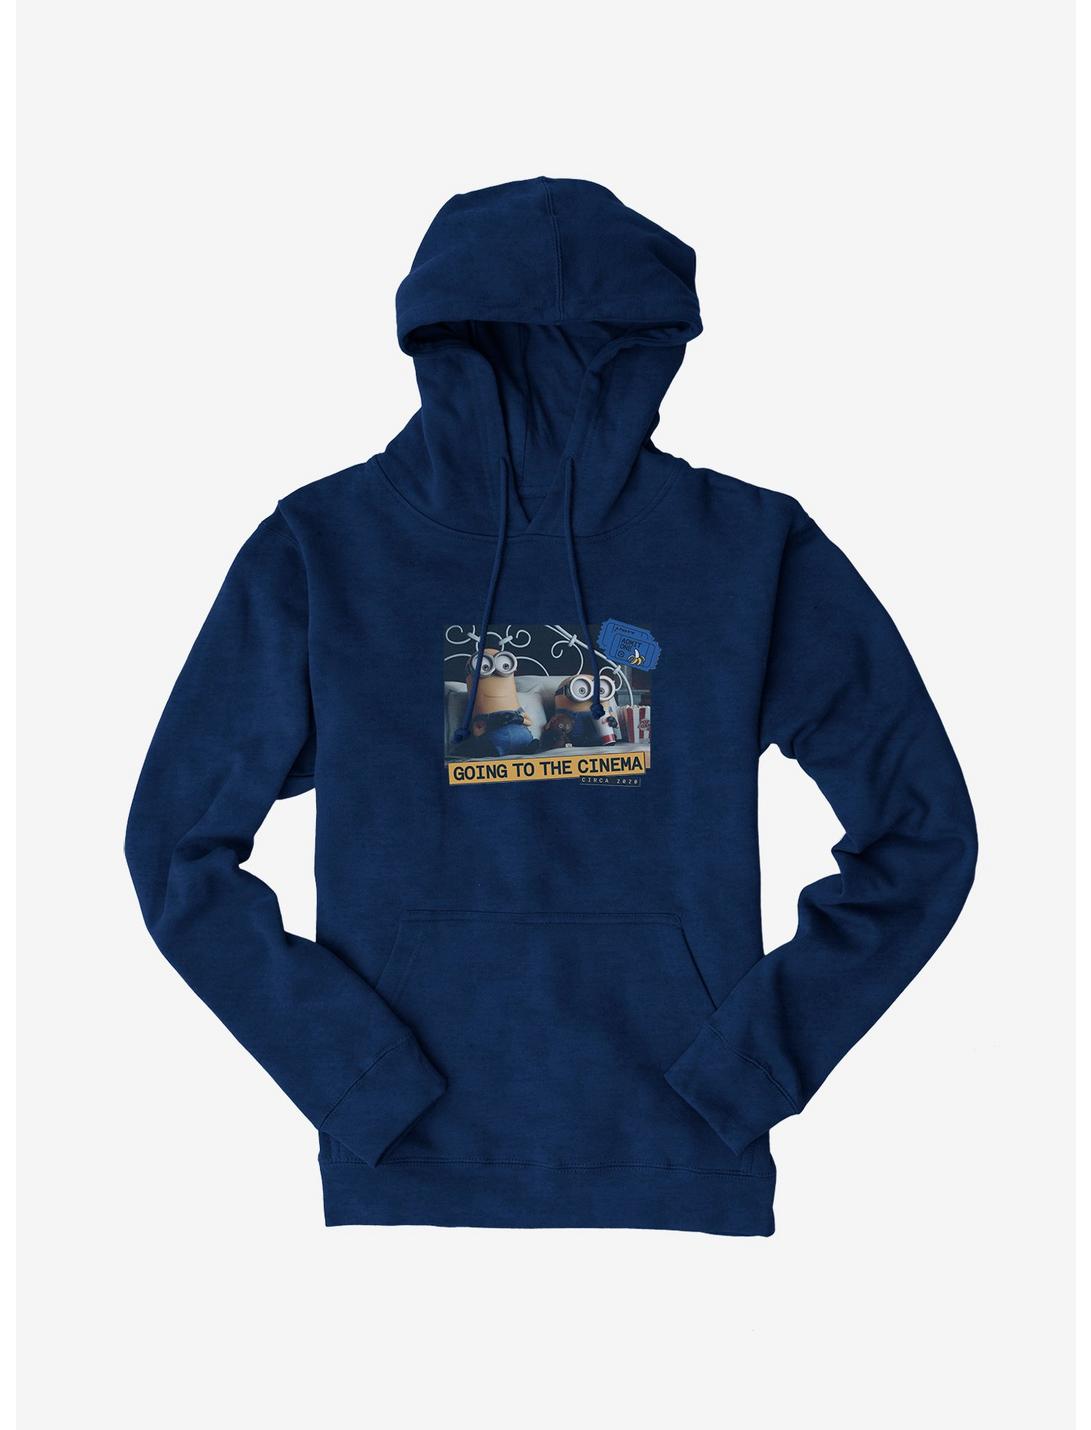 Minions Going To The Cinema Circa 2020 Hoodie, NAVY, hi-res